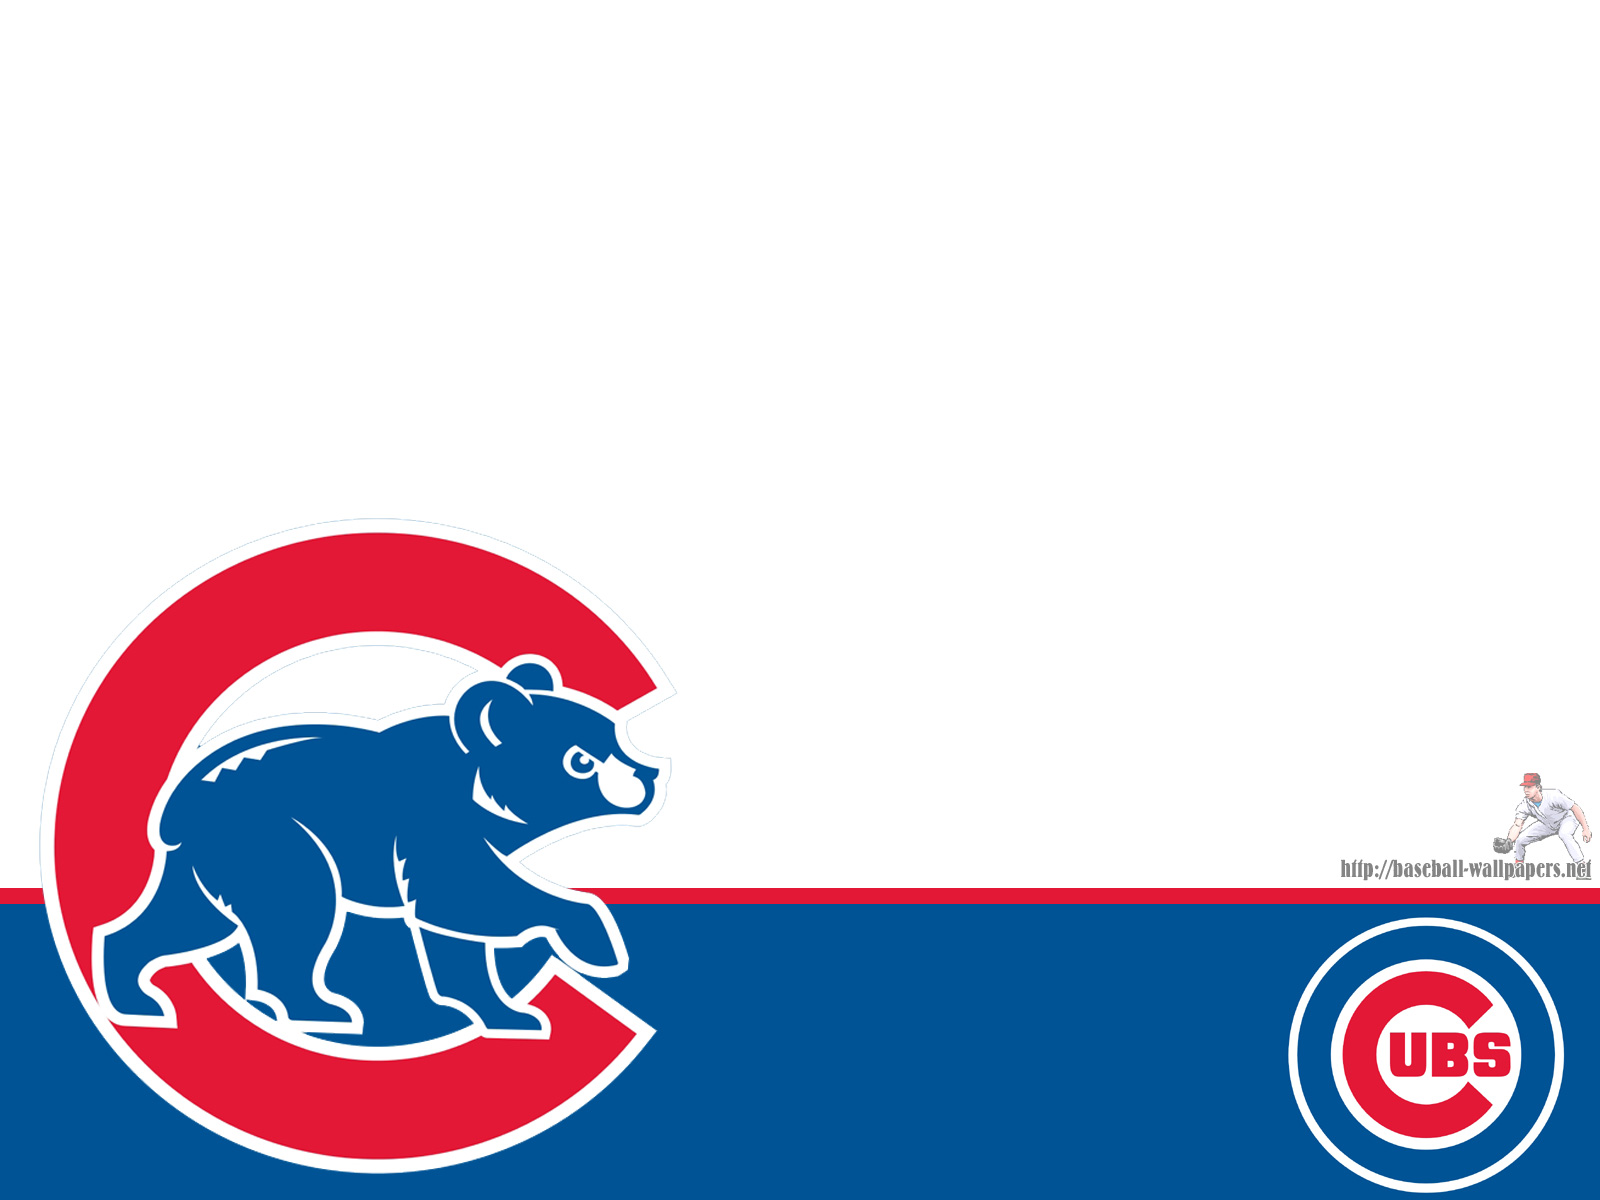 Cubs Wallpaper Iphone Chicago cubs wallpapers 1600x1200